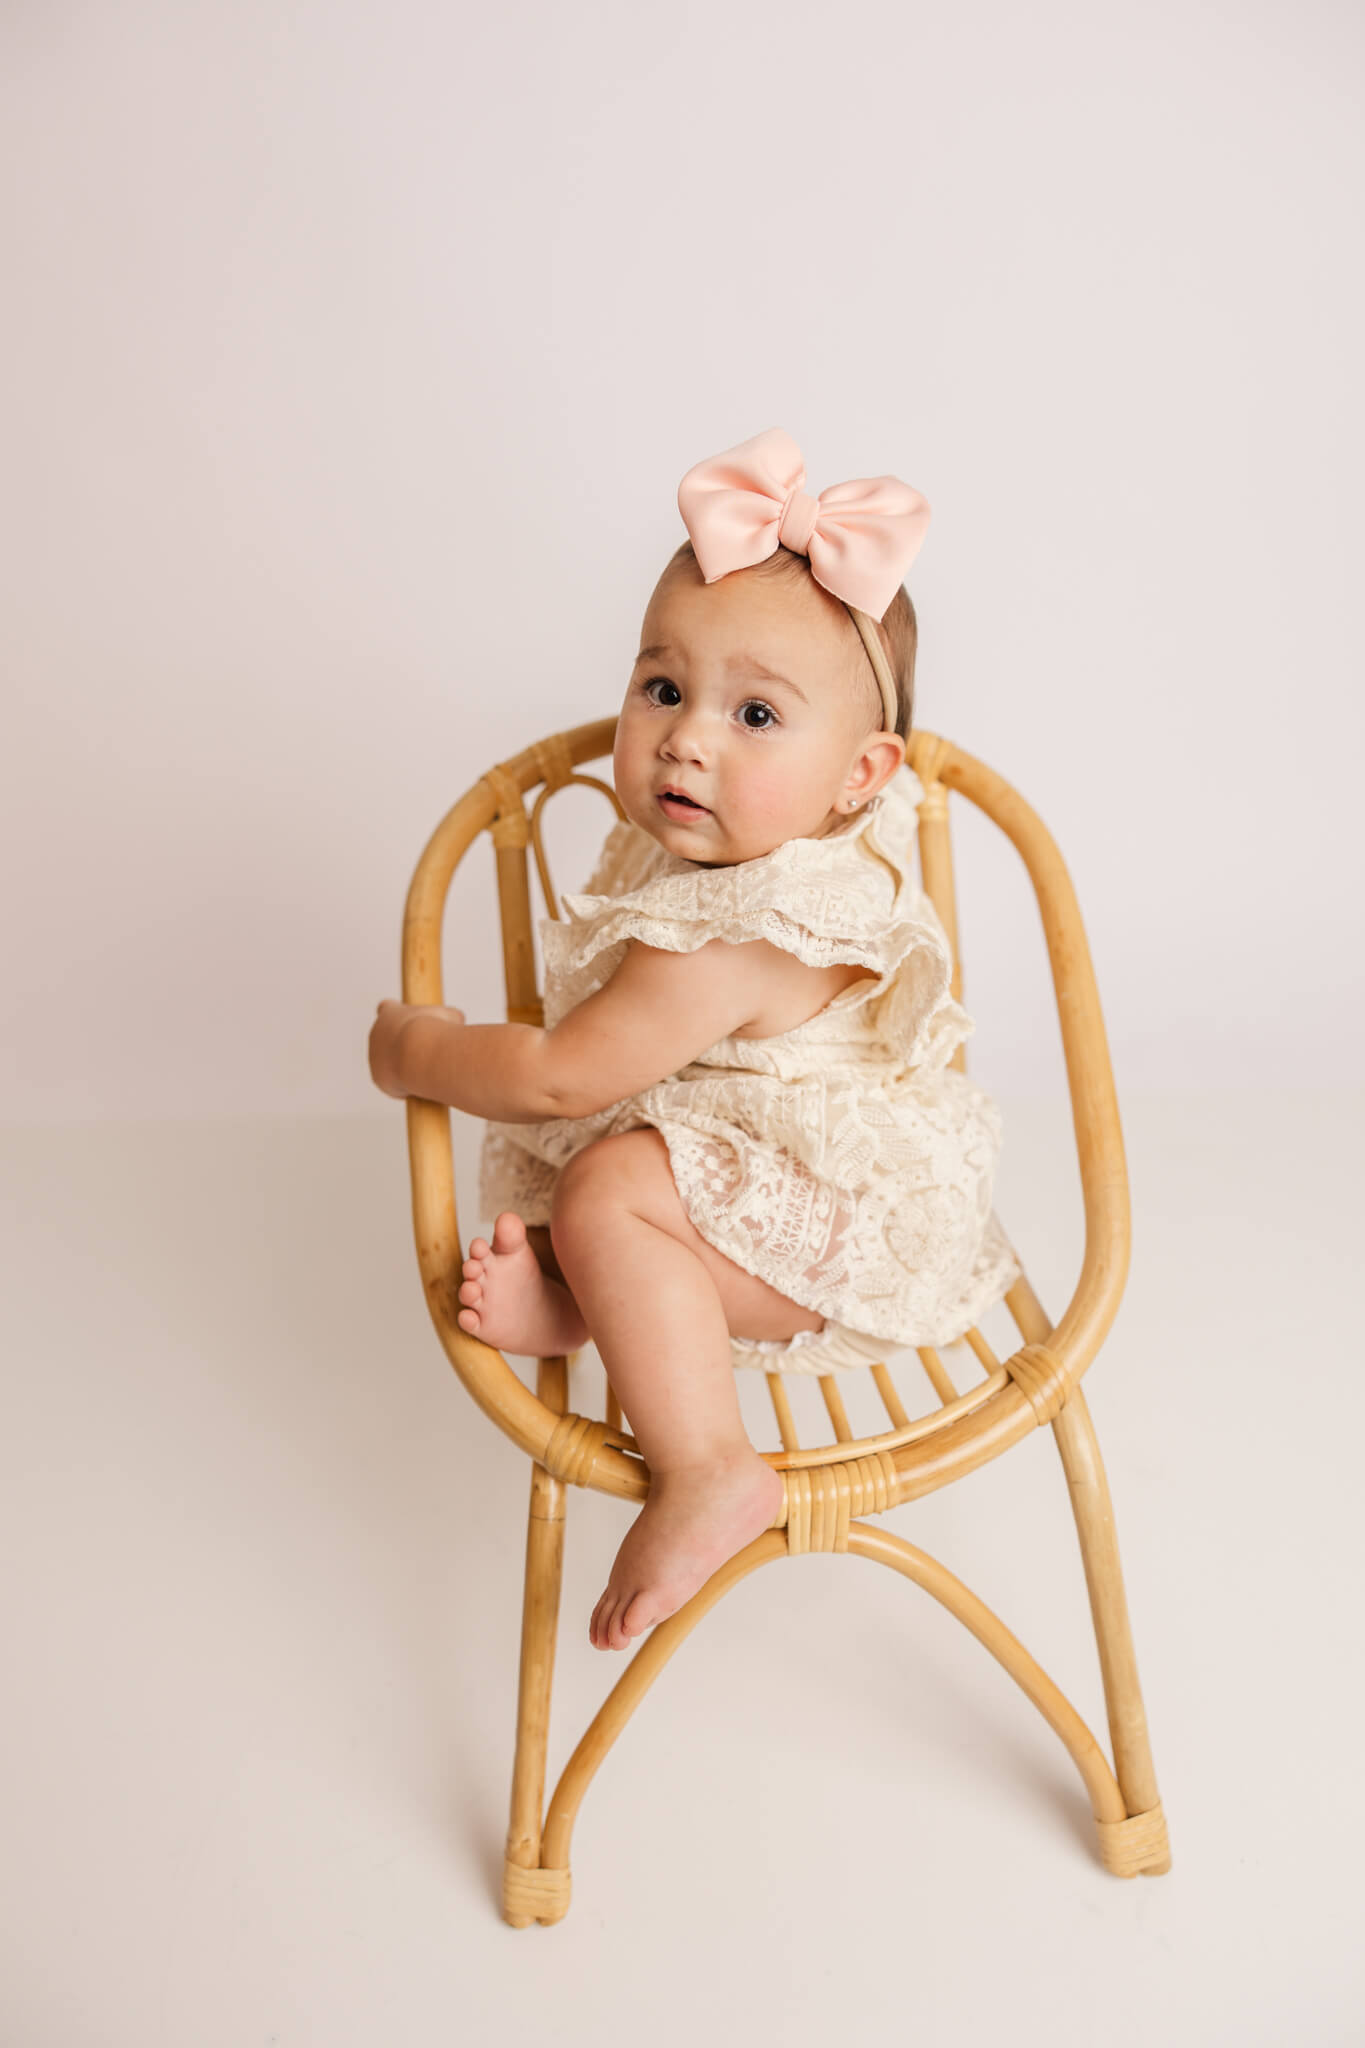 little girl with large pink bow playing in a chair